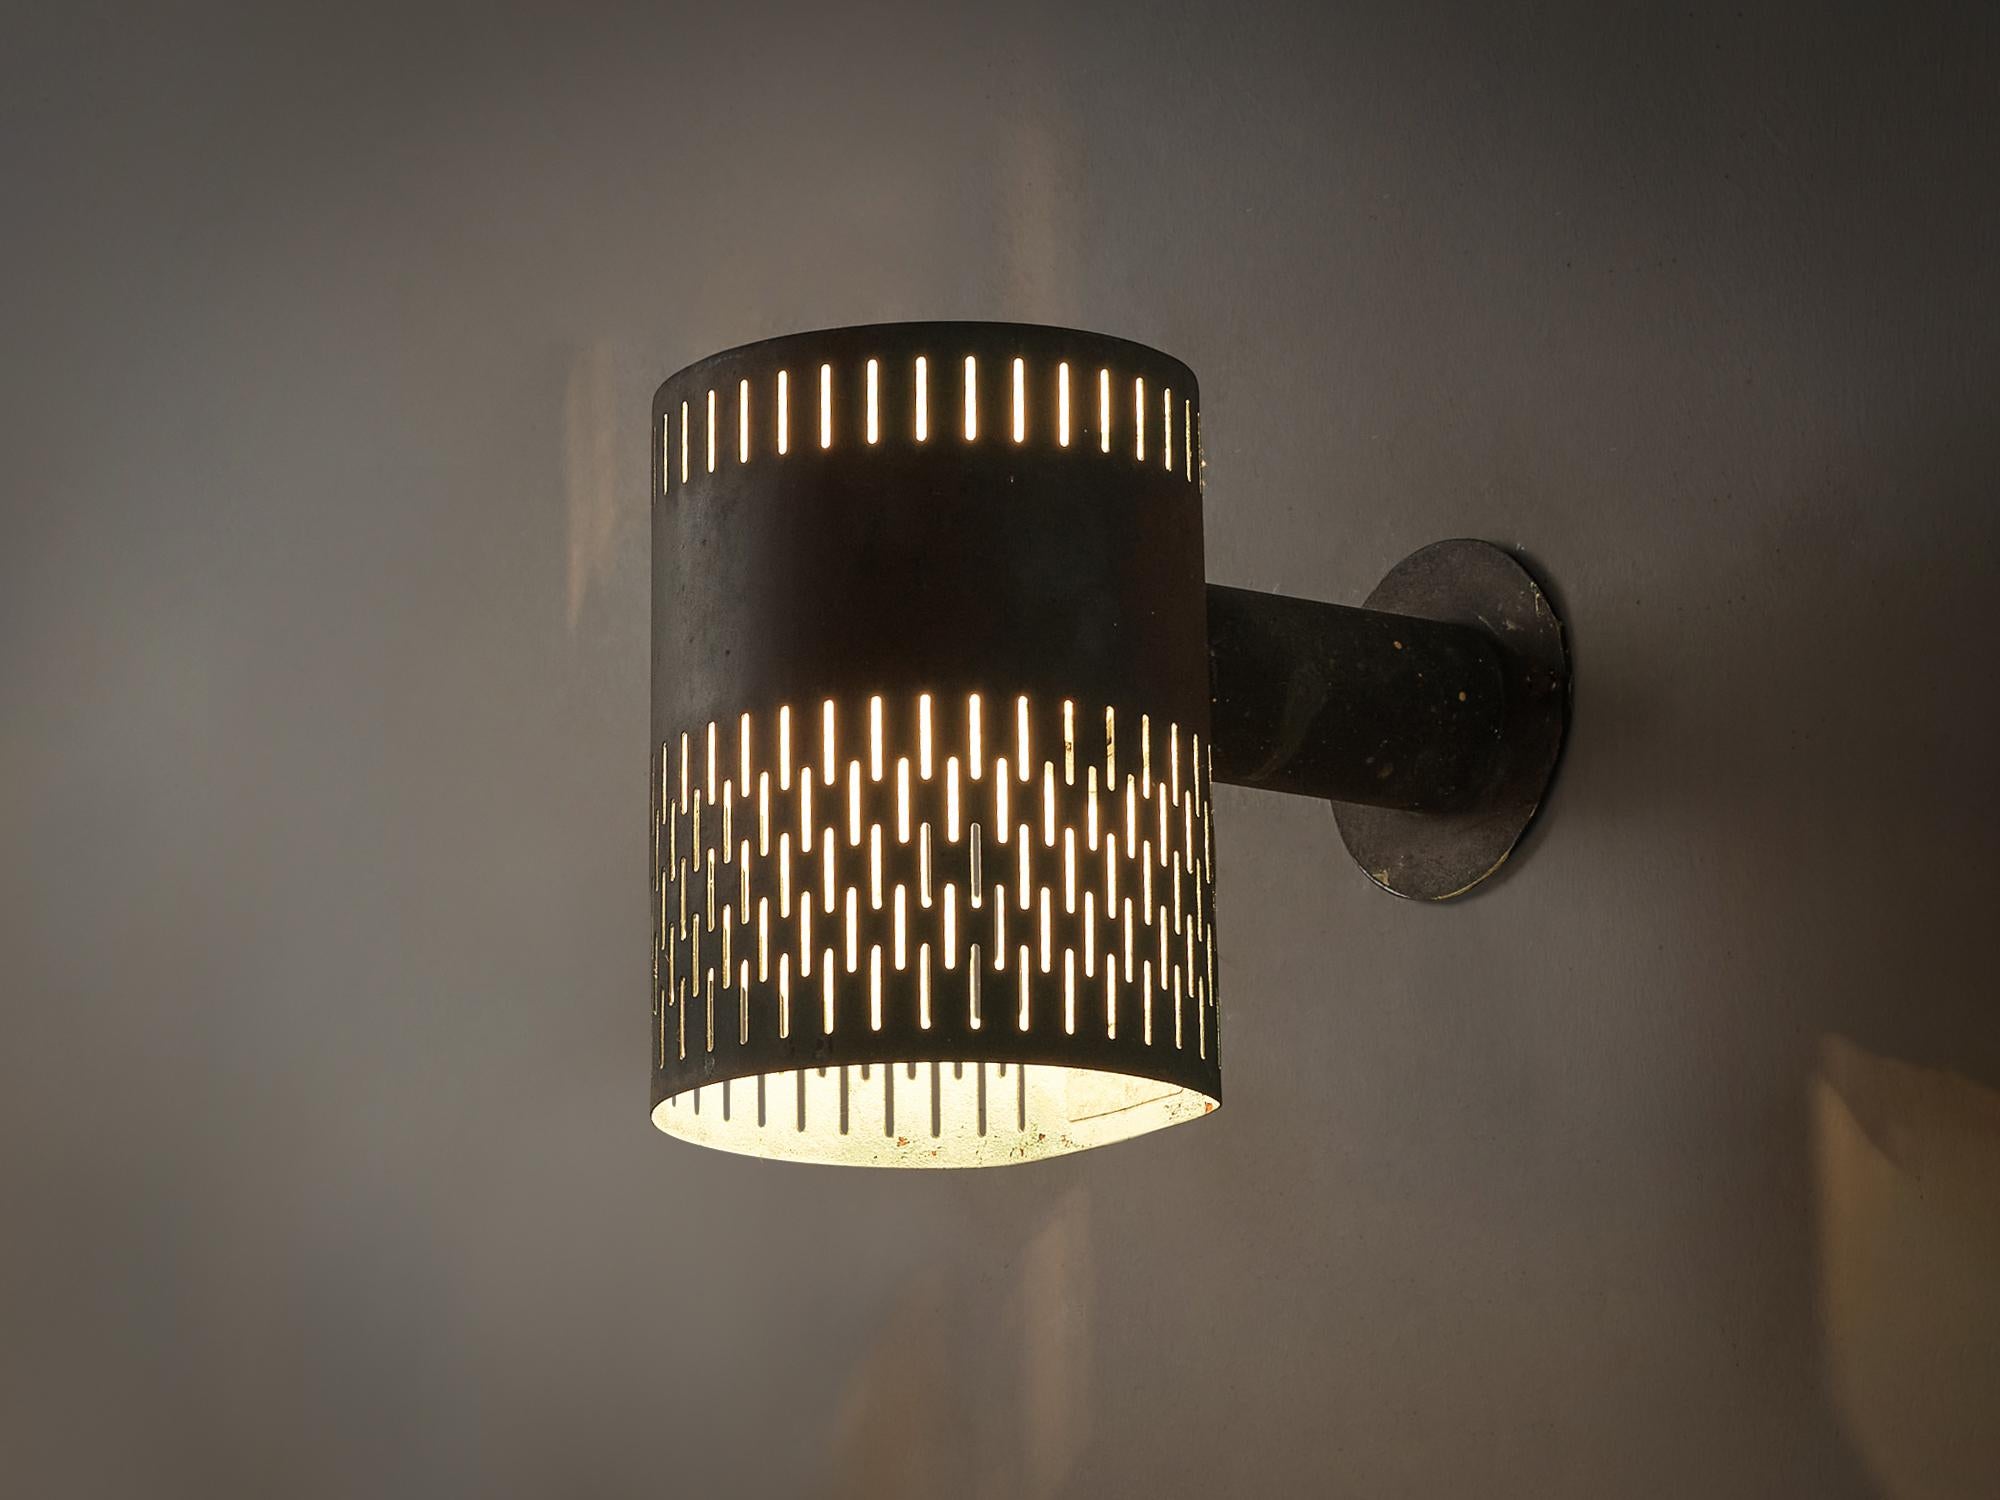 Hans-Agne Jakobsson, wall light, copper, Sweden, 1960s

This wall light shows not only an admirable patina but also a well-balanced design by Hans-Agne Jakobsson. The cylindrical shape shows a nice pattern of gaps through which the light is